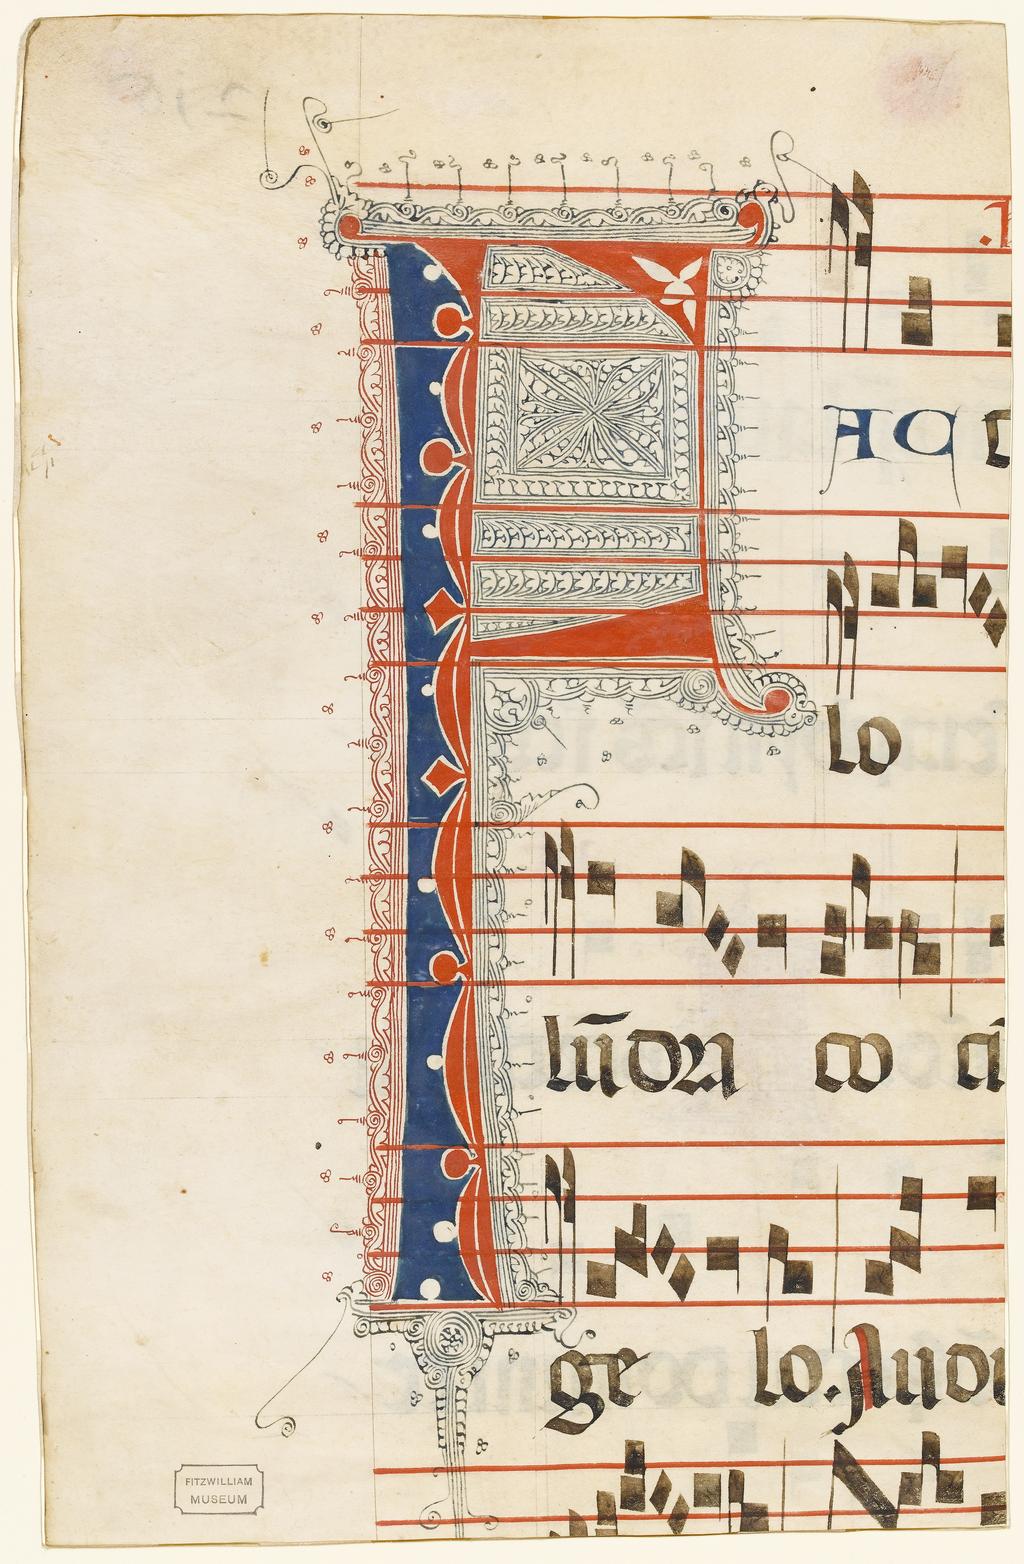 An image of Illuminated manuscript. Cutting. Fragmentary leaf from an Antiphoner. Production Place: Italy. Parchment, gold, 367 x 230 mm, five fragmentary four-line musical staves ruled in red ink, five fragmentary lines of text ruled in plummet, circa 1390 to circa 1399.CONTENTS: On reverse (original recto), parts of the second antiphon for the psalms in the first nocturn of Matins for the feast of St Michael in the Roman/Franciscan Antiphoner, [Laudemus Dominum que]m laudant angeli [quem cherubim et] seraphyn sanctus sanctus sanctus [proclamant…] followed by the third antiphon, Ascendit fu[mus aromatum in] conspectu Domini de [manu angeli], followed on the recto (original verso) by the responsory to the first lesson, Fact[um est silentium in ce]lo [dum committeret bel]lum draco cum [Michaele archan]gelo. Audi[ta est vox milia milium dicentium salus honor et virtus omnipotenti deo]; the initial F, originally on the recto of the leaf, would have introduced the first responsory in Matins for the feast of St Michael (29 September) in a Roman/Franciscan Antiphoner for the Sanctoral. ORNAMENTATION: Red and blue parted initial [F, 4 ll.] with voided ornament and red and blue pen-flourished infill and extensions, following letters written in blue; red one-line penwork initial [A] with purple pen-flourished infill and extensions on reverse; capitals highlighted in red.